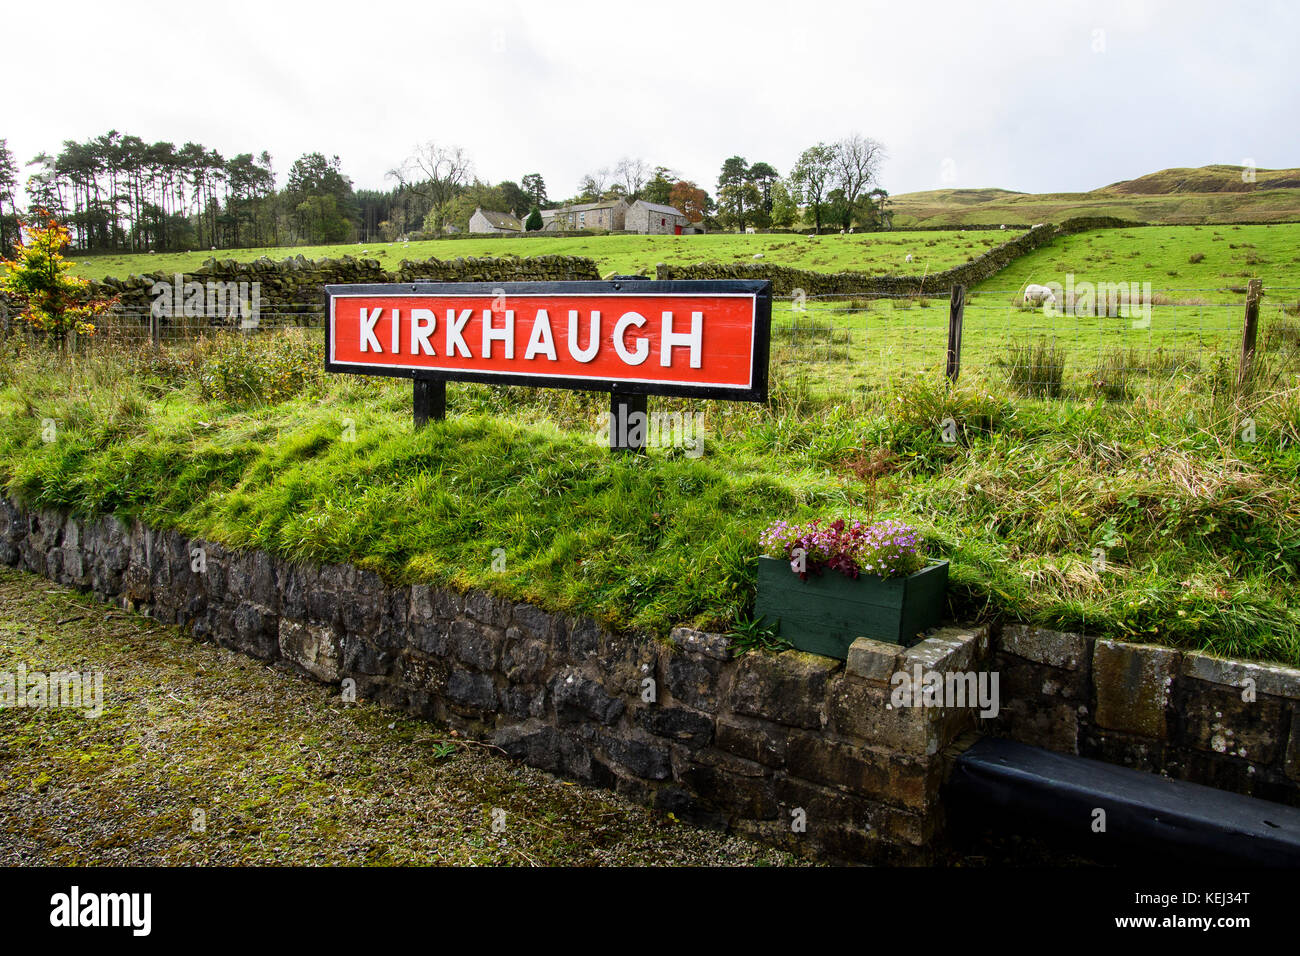 Stock Photo -  South Tynedale Railway is a preserved, 2 ft (610 mm) narrow gauge heritage railway in Northern England and is England's highest narrow gauge railway.  © Hugh Peterswald/Alamy Stock Photo